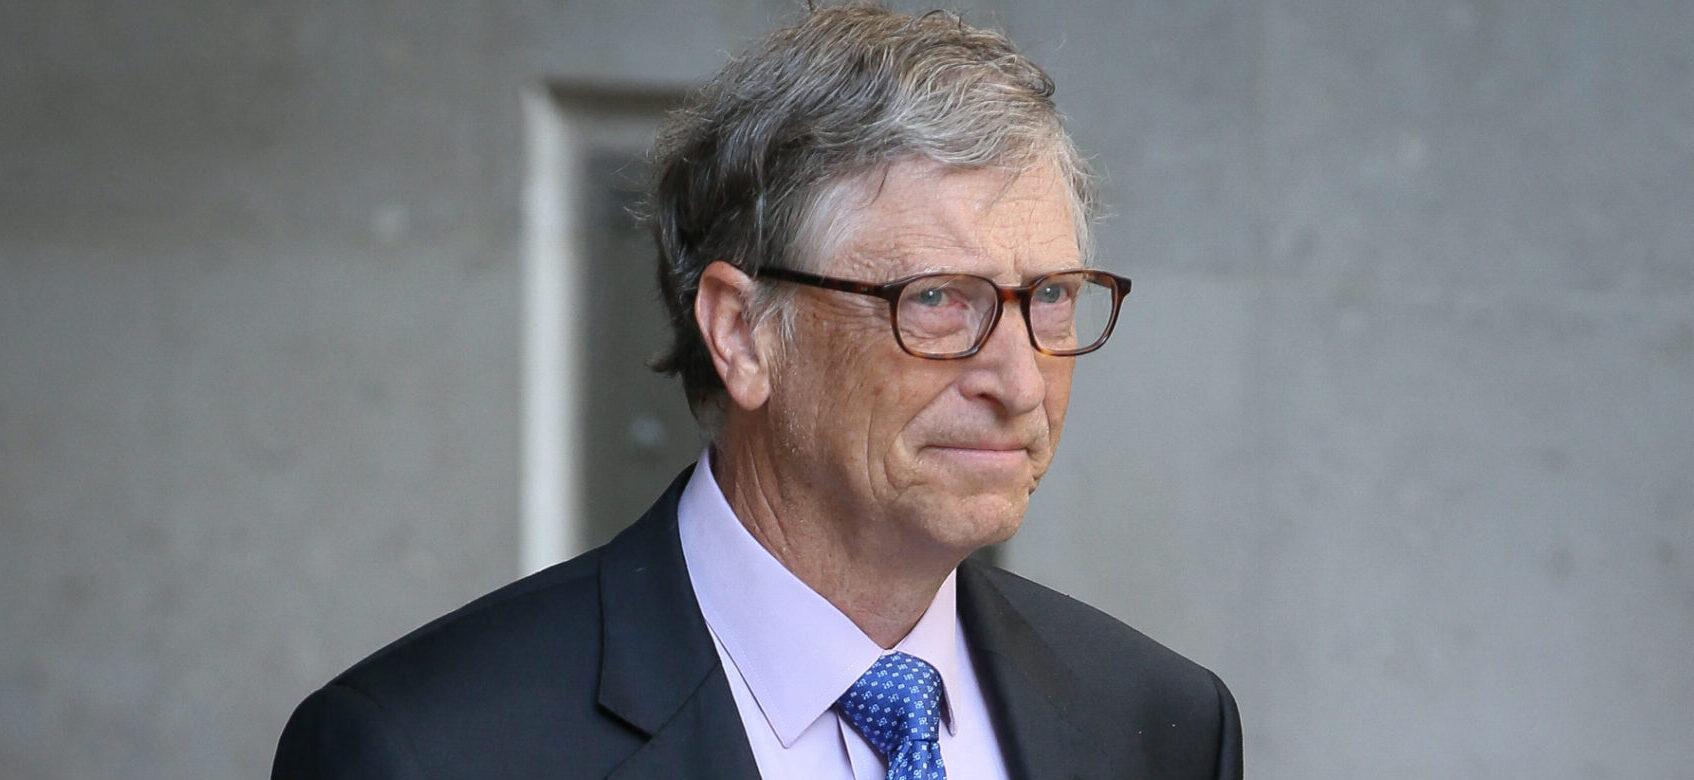 Bill Gates seen leaving BBC Radio Studios after being interviewed fighting against malaria - London